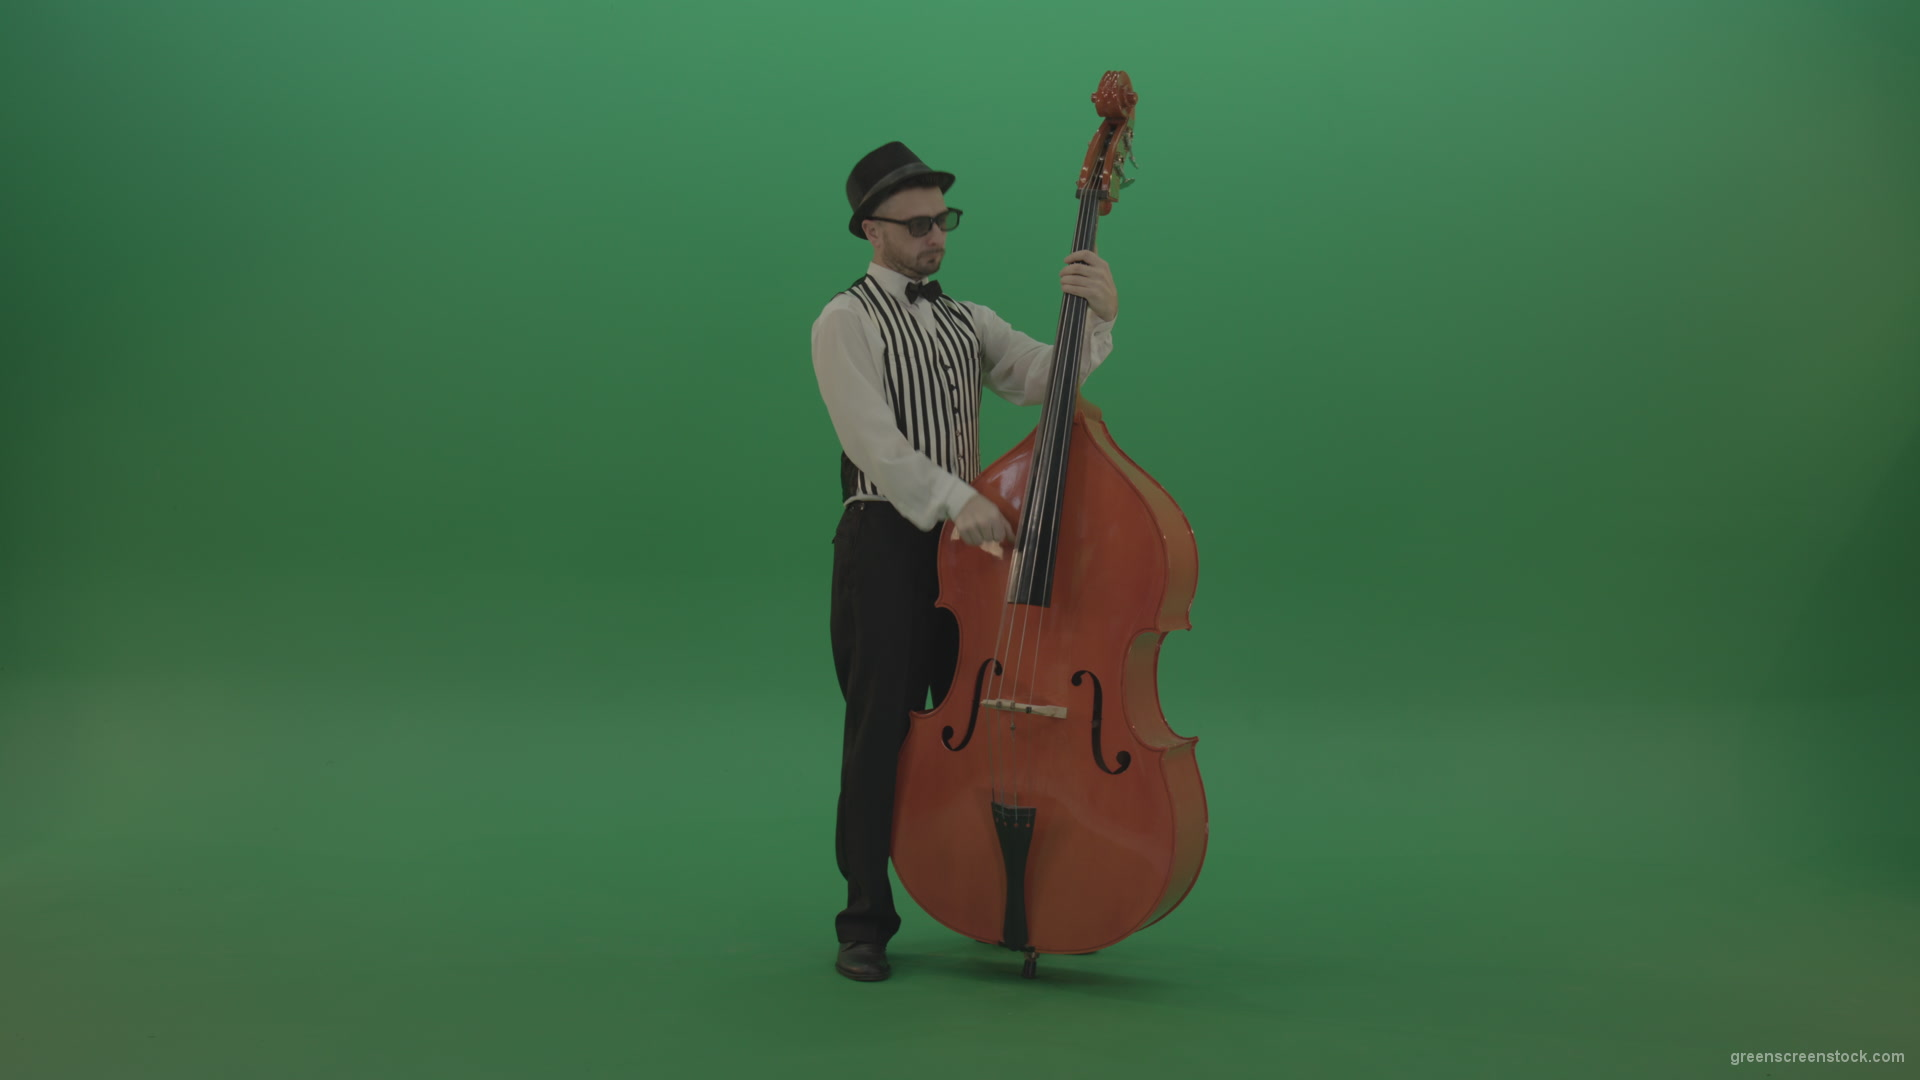 Full-size-man-play-jazz-on-double-bass-String-music-instrument-isolated-on-green-screen_009 Green Screen Stock